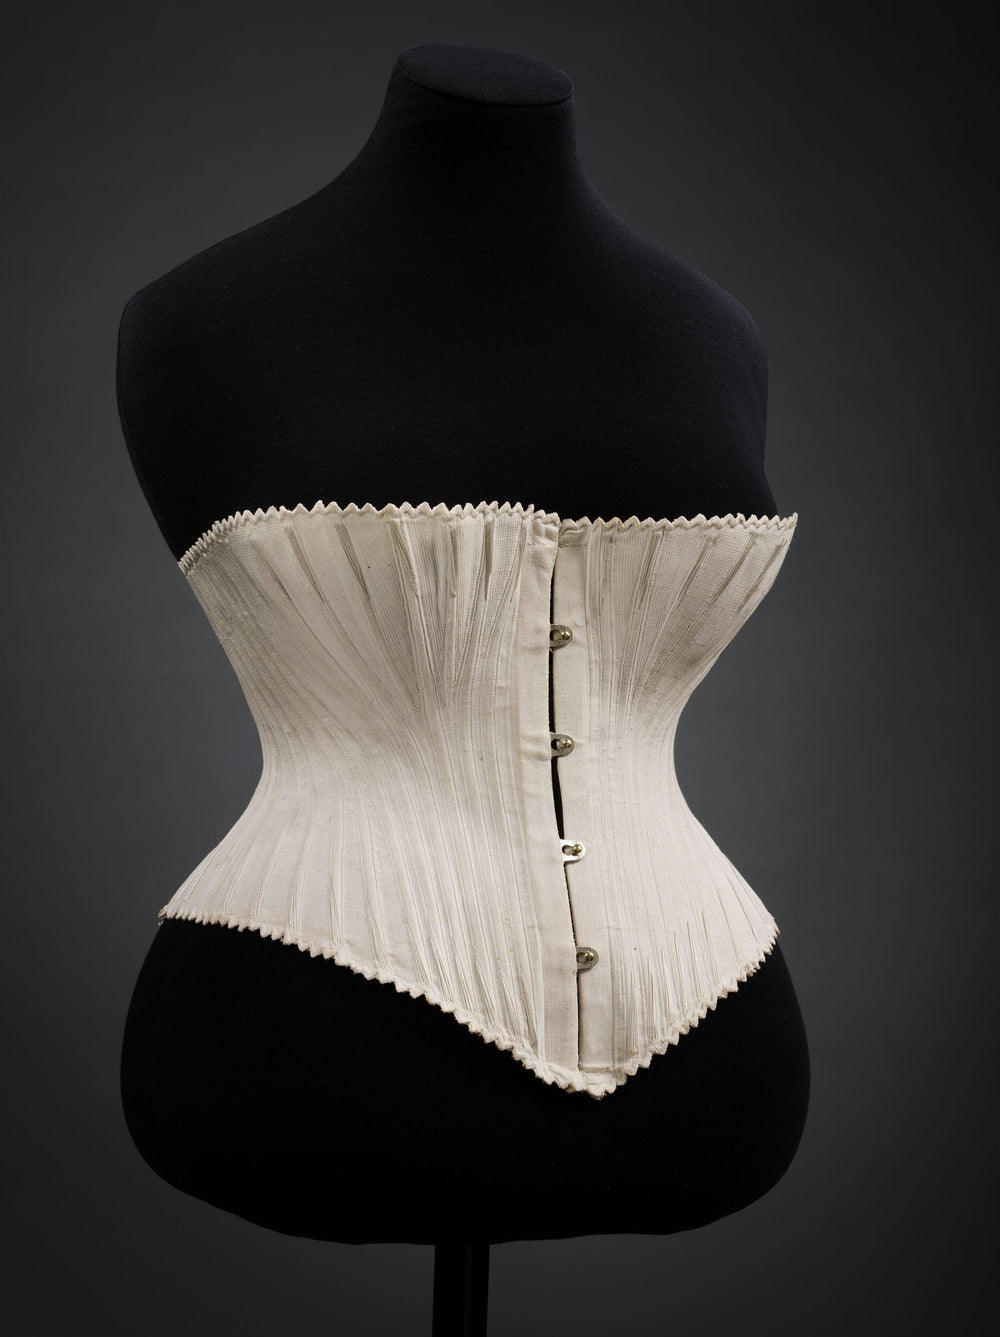 A Brief History of the Corset